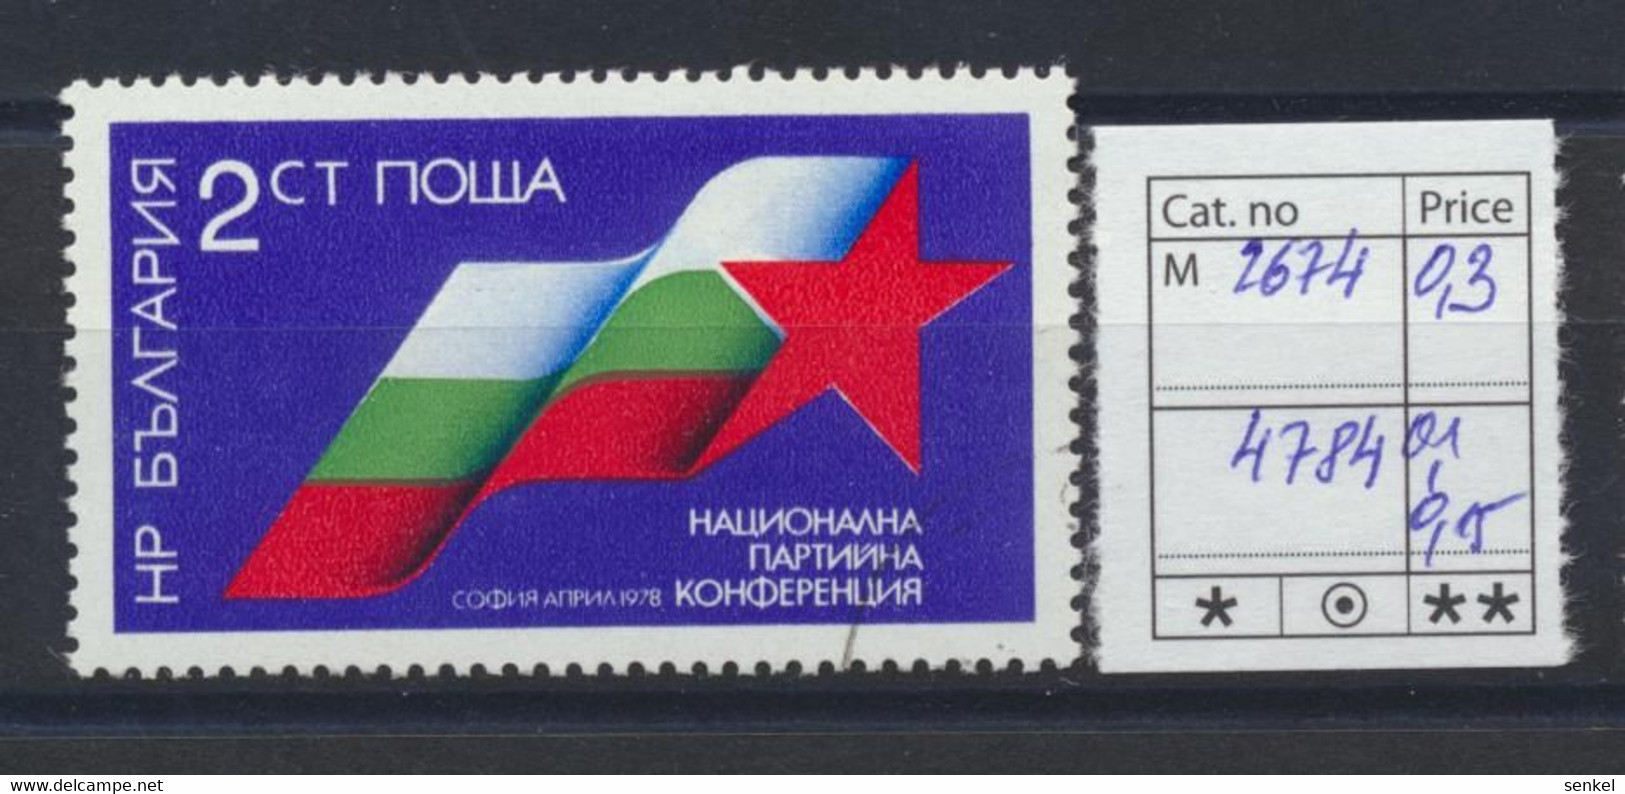 4778 - 4810 Bulgaria 1978 different stamps Red Cross TV history art literature flowers birds sport exhibition